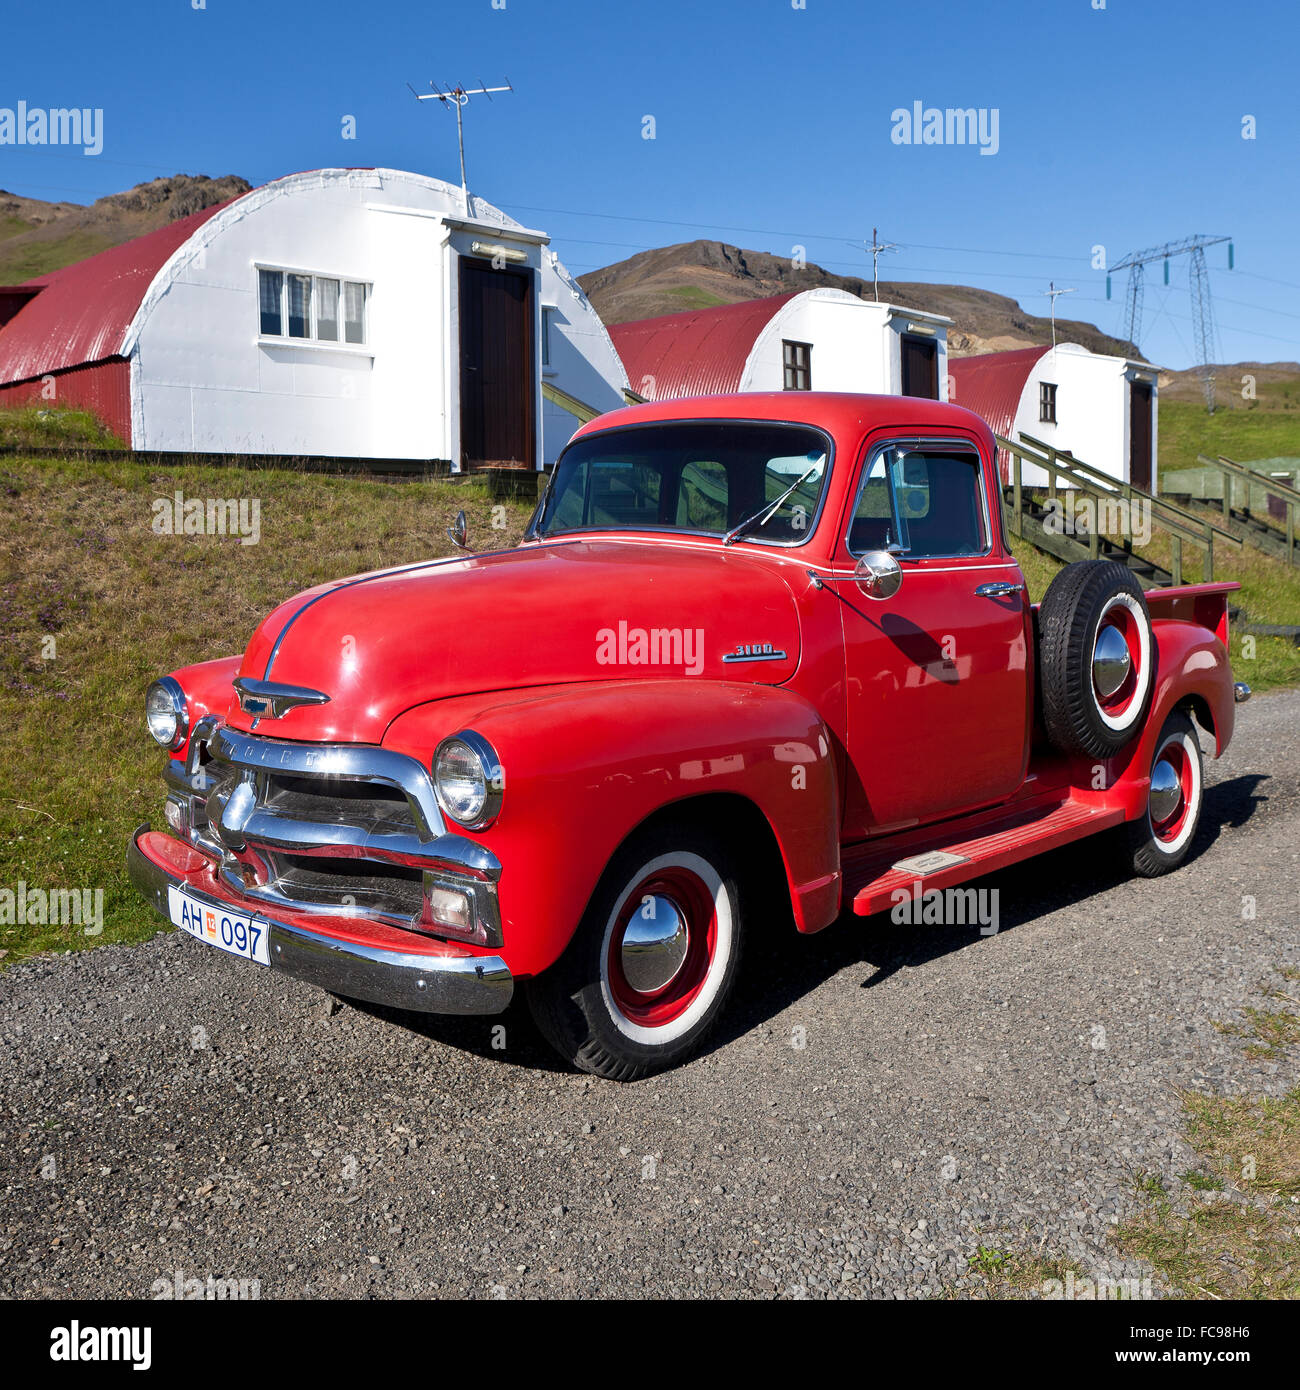 Old Chevrolet pickup truck in front of old summer cabins, Hvalfjordur, Iceland Stock Photo